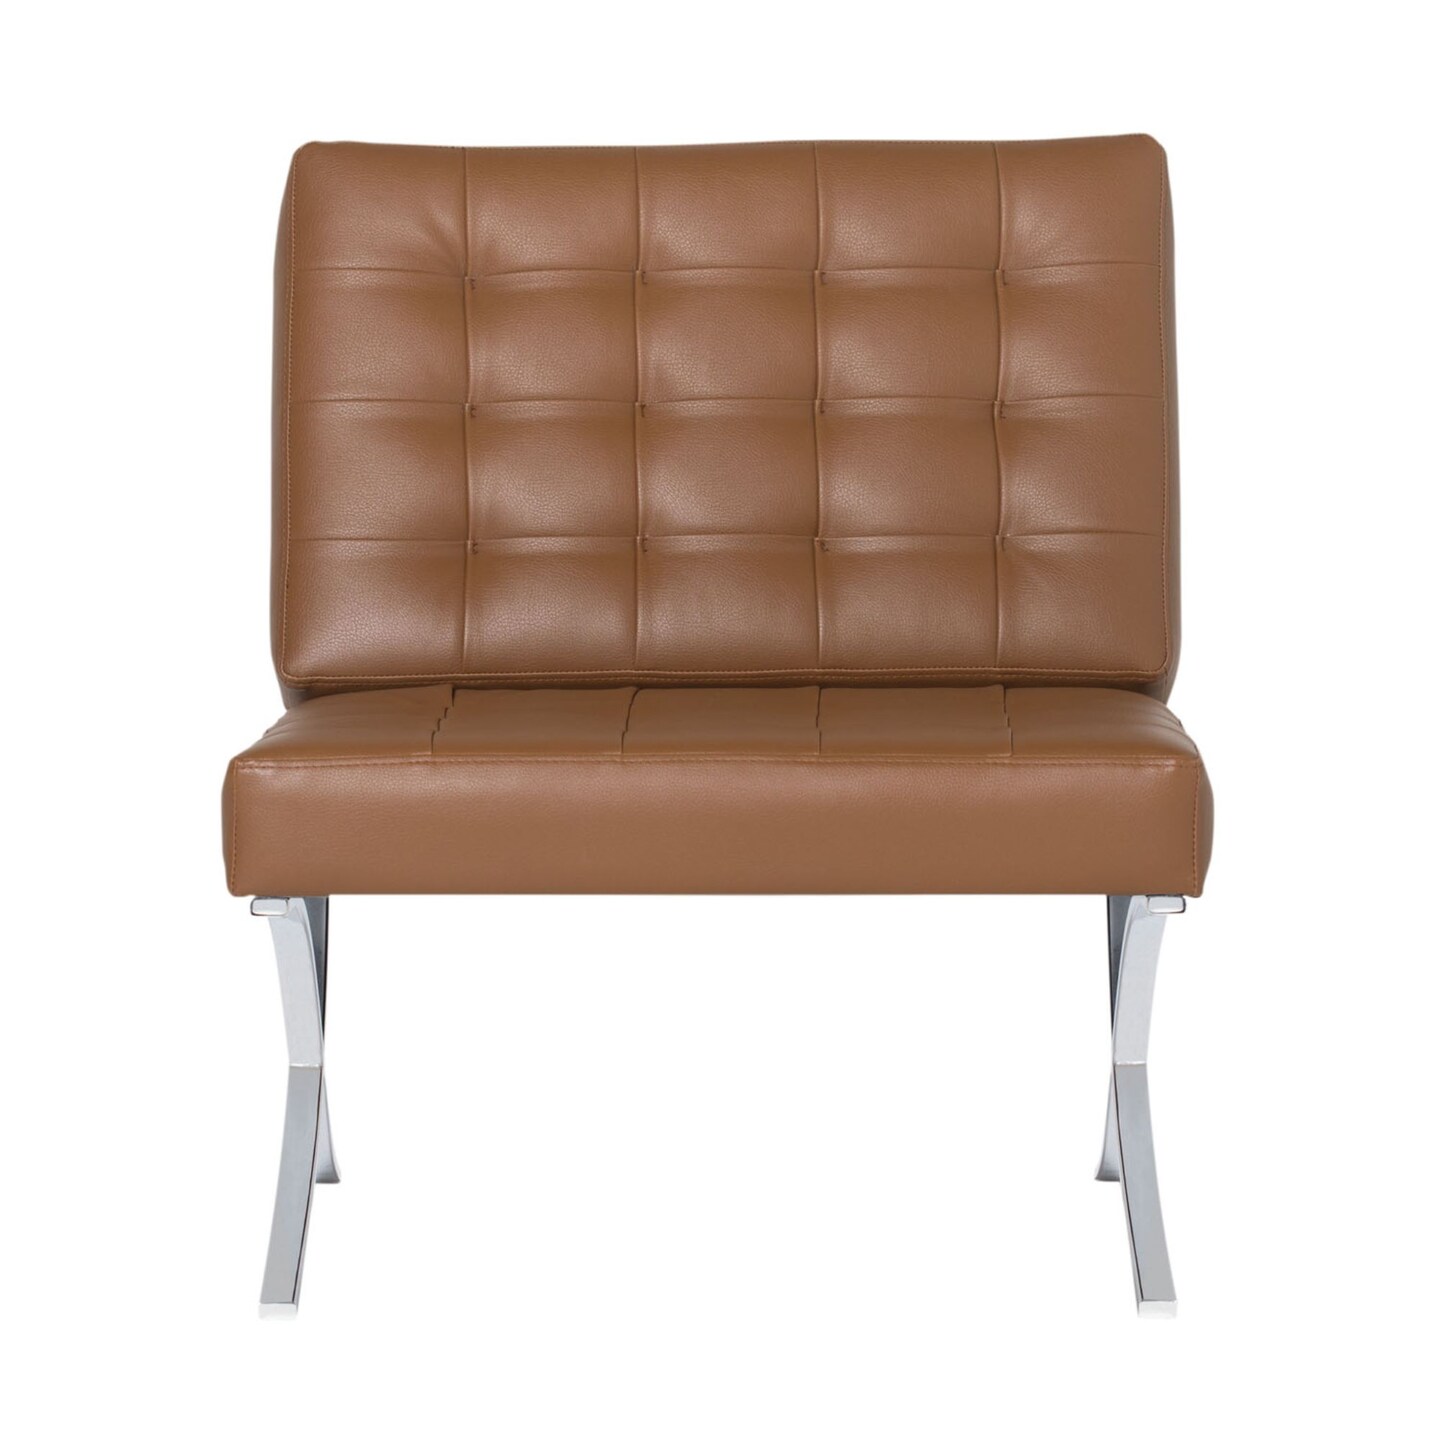 Studio Designs Home Atrium Modern Bonded Leather Accent Chair In Caramel Brown / Chrome